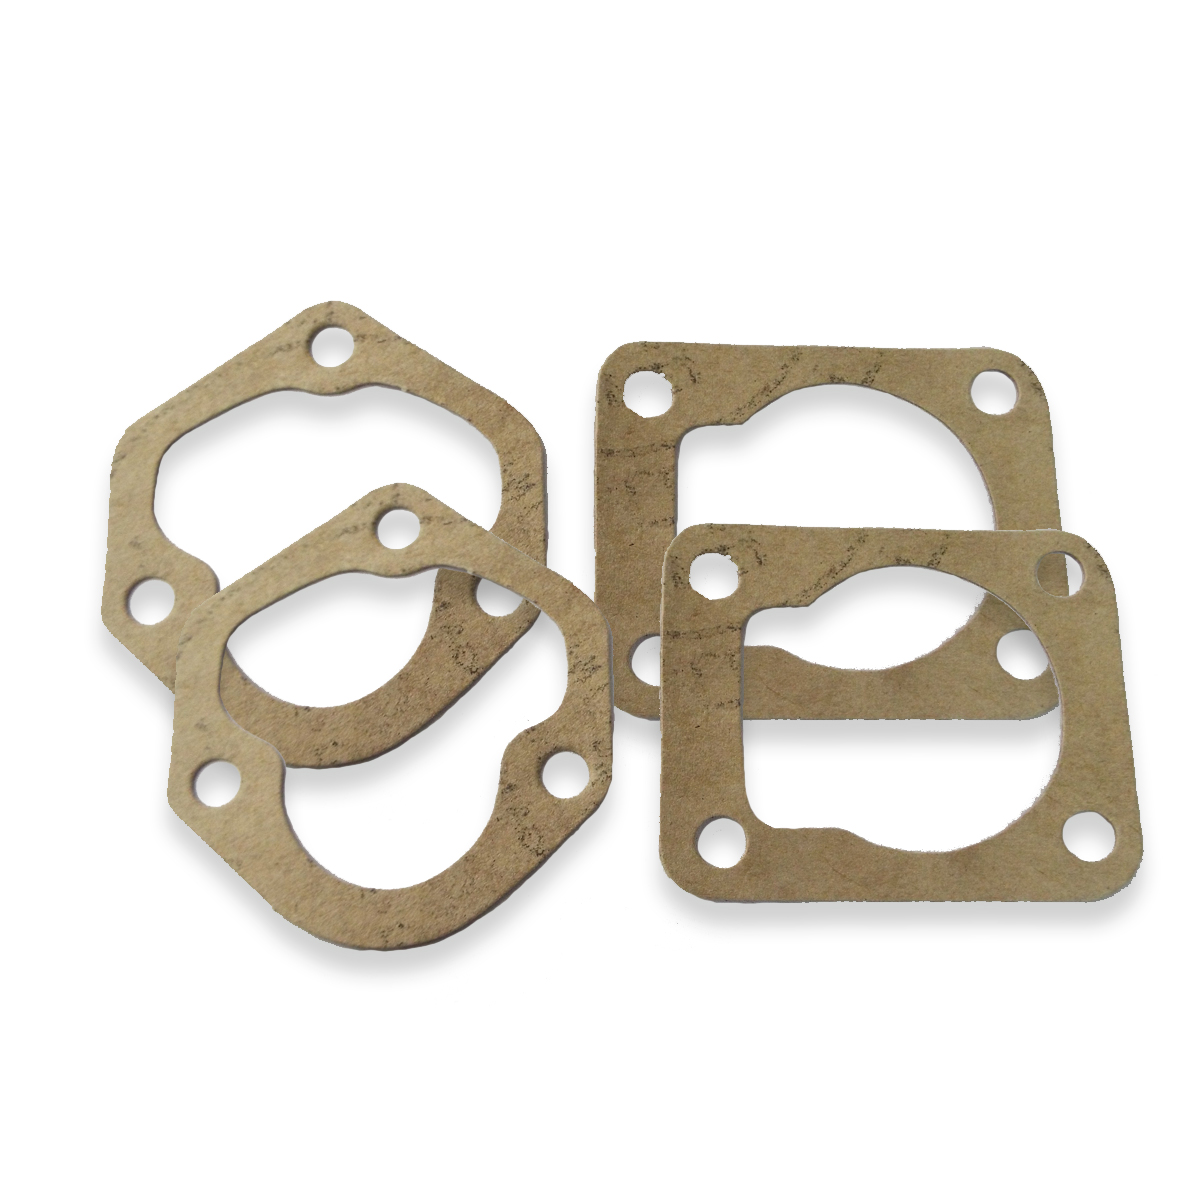 1941-1946 Steering Gear Box Gaskets Chevrolet and GMC Pickup Truck